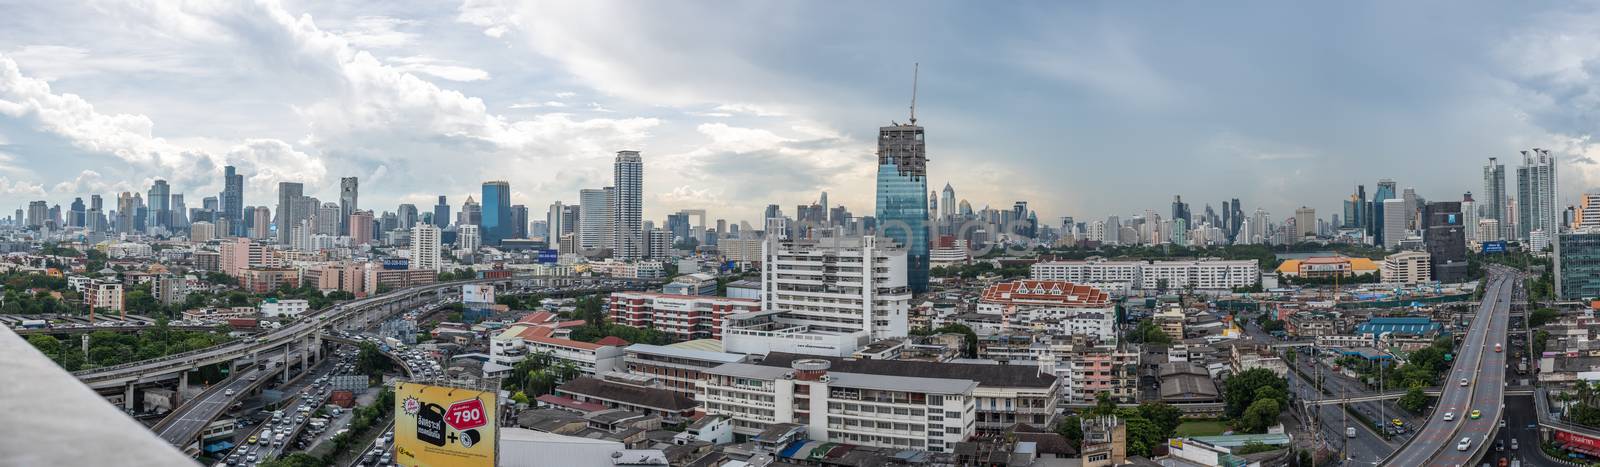 Panorama cityscape with building in Bangkok city by PongMoji